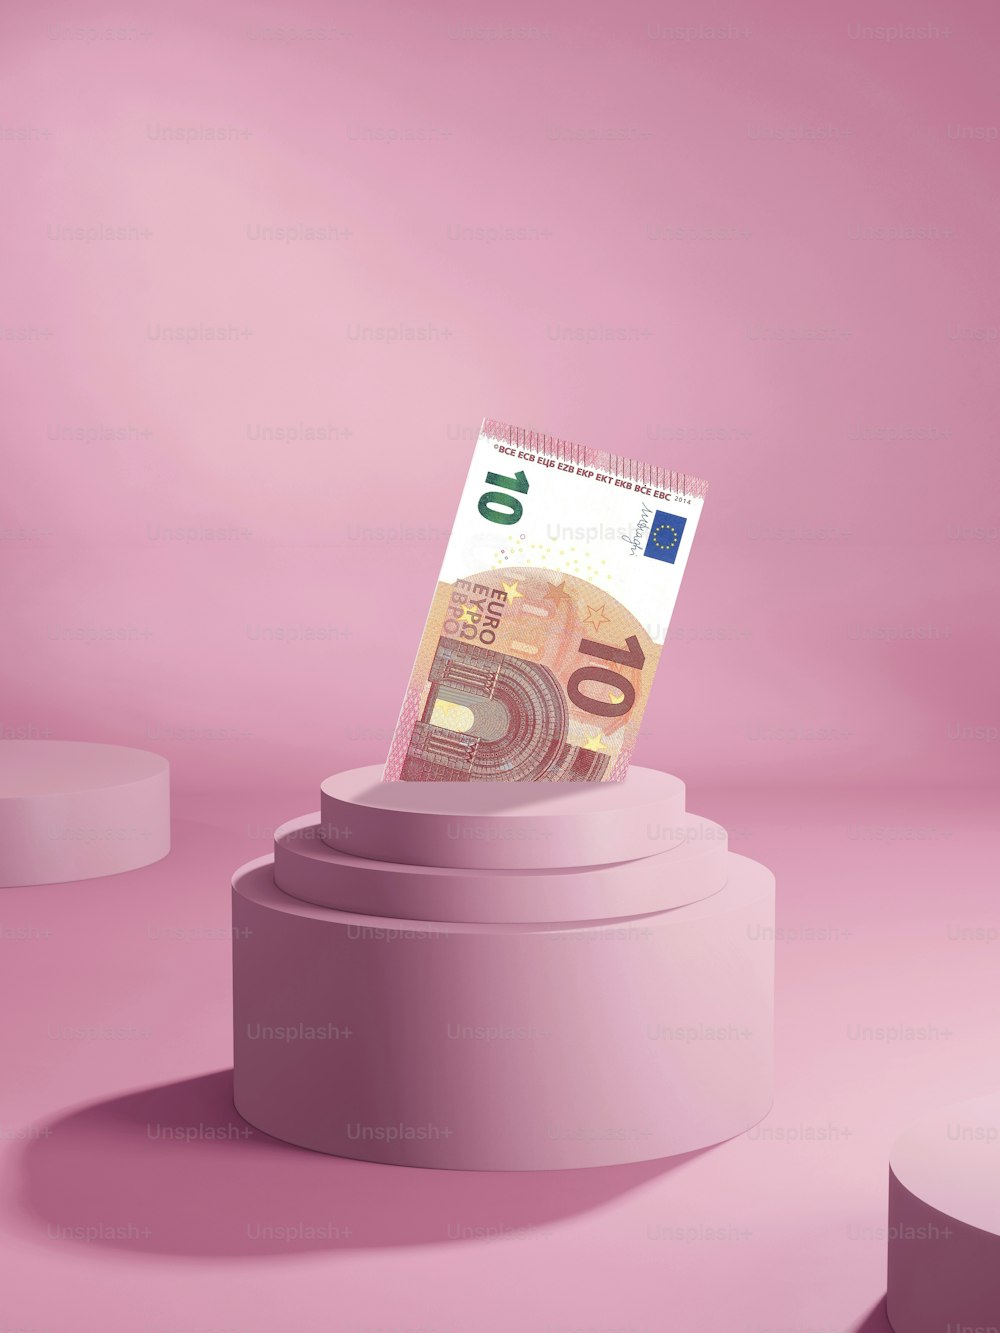 Best Euro Money Pictures [HD]  Download Free Images on Unsplash